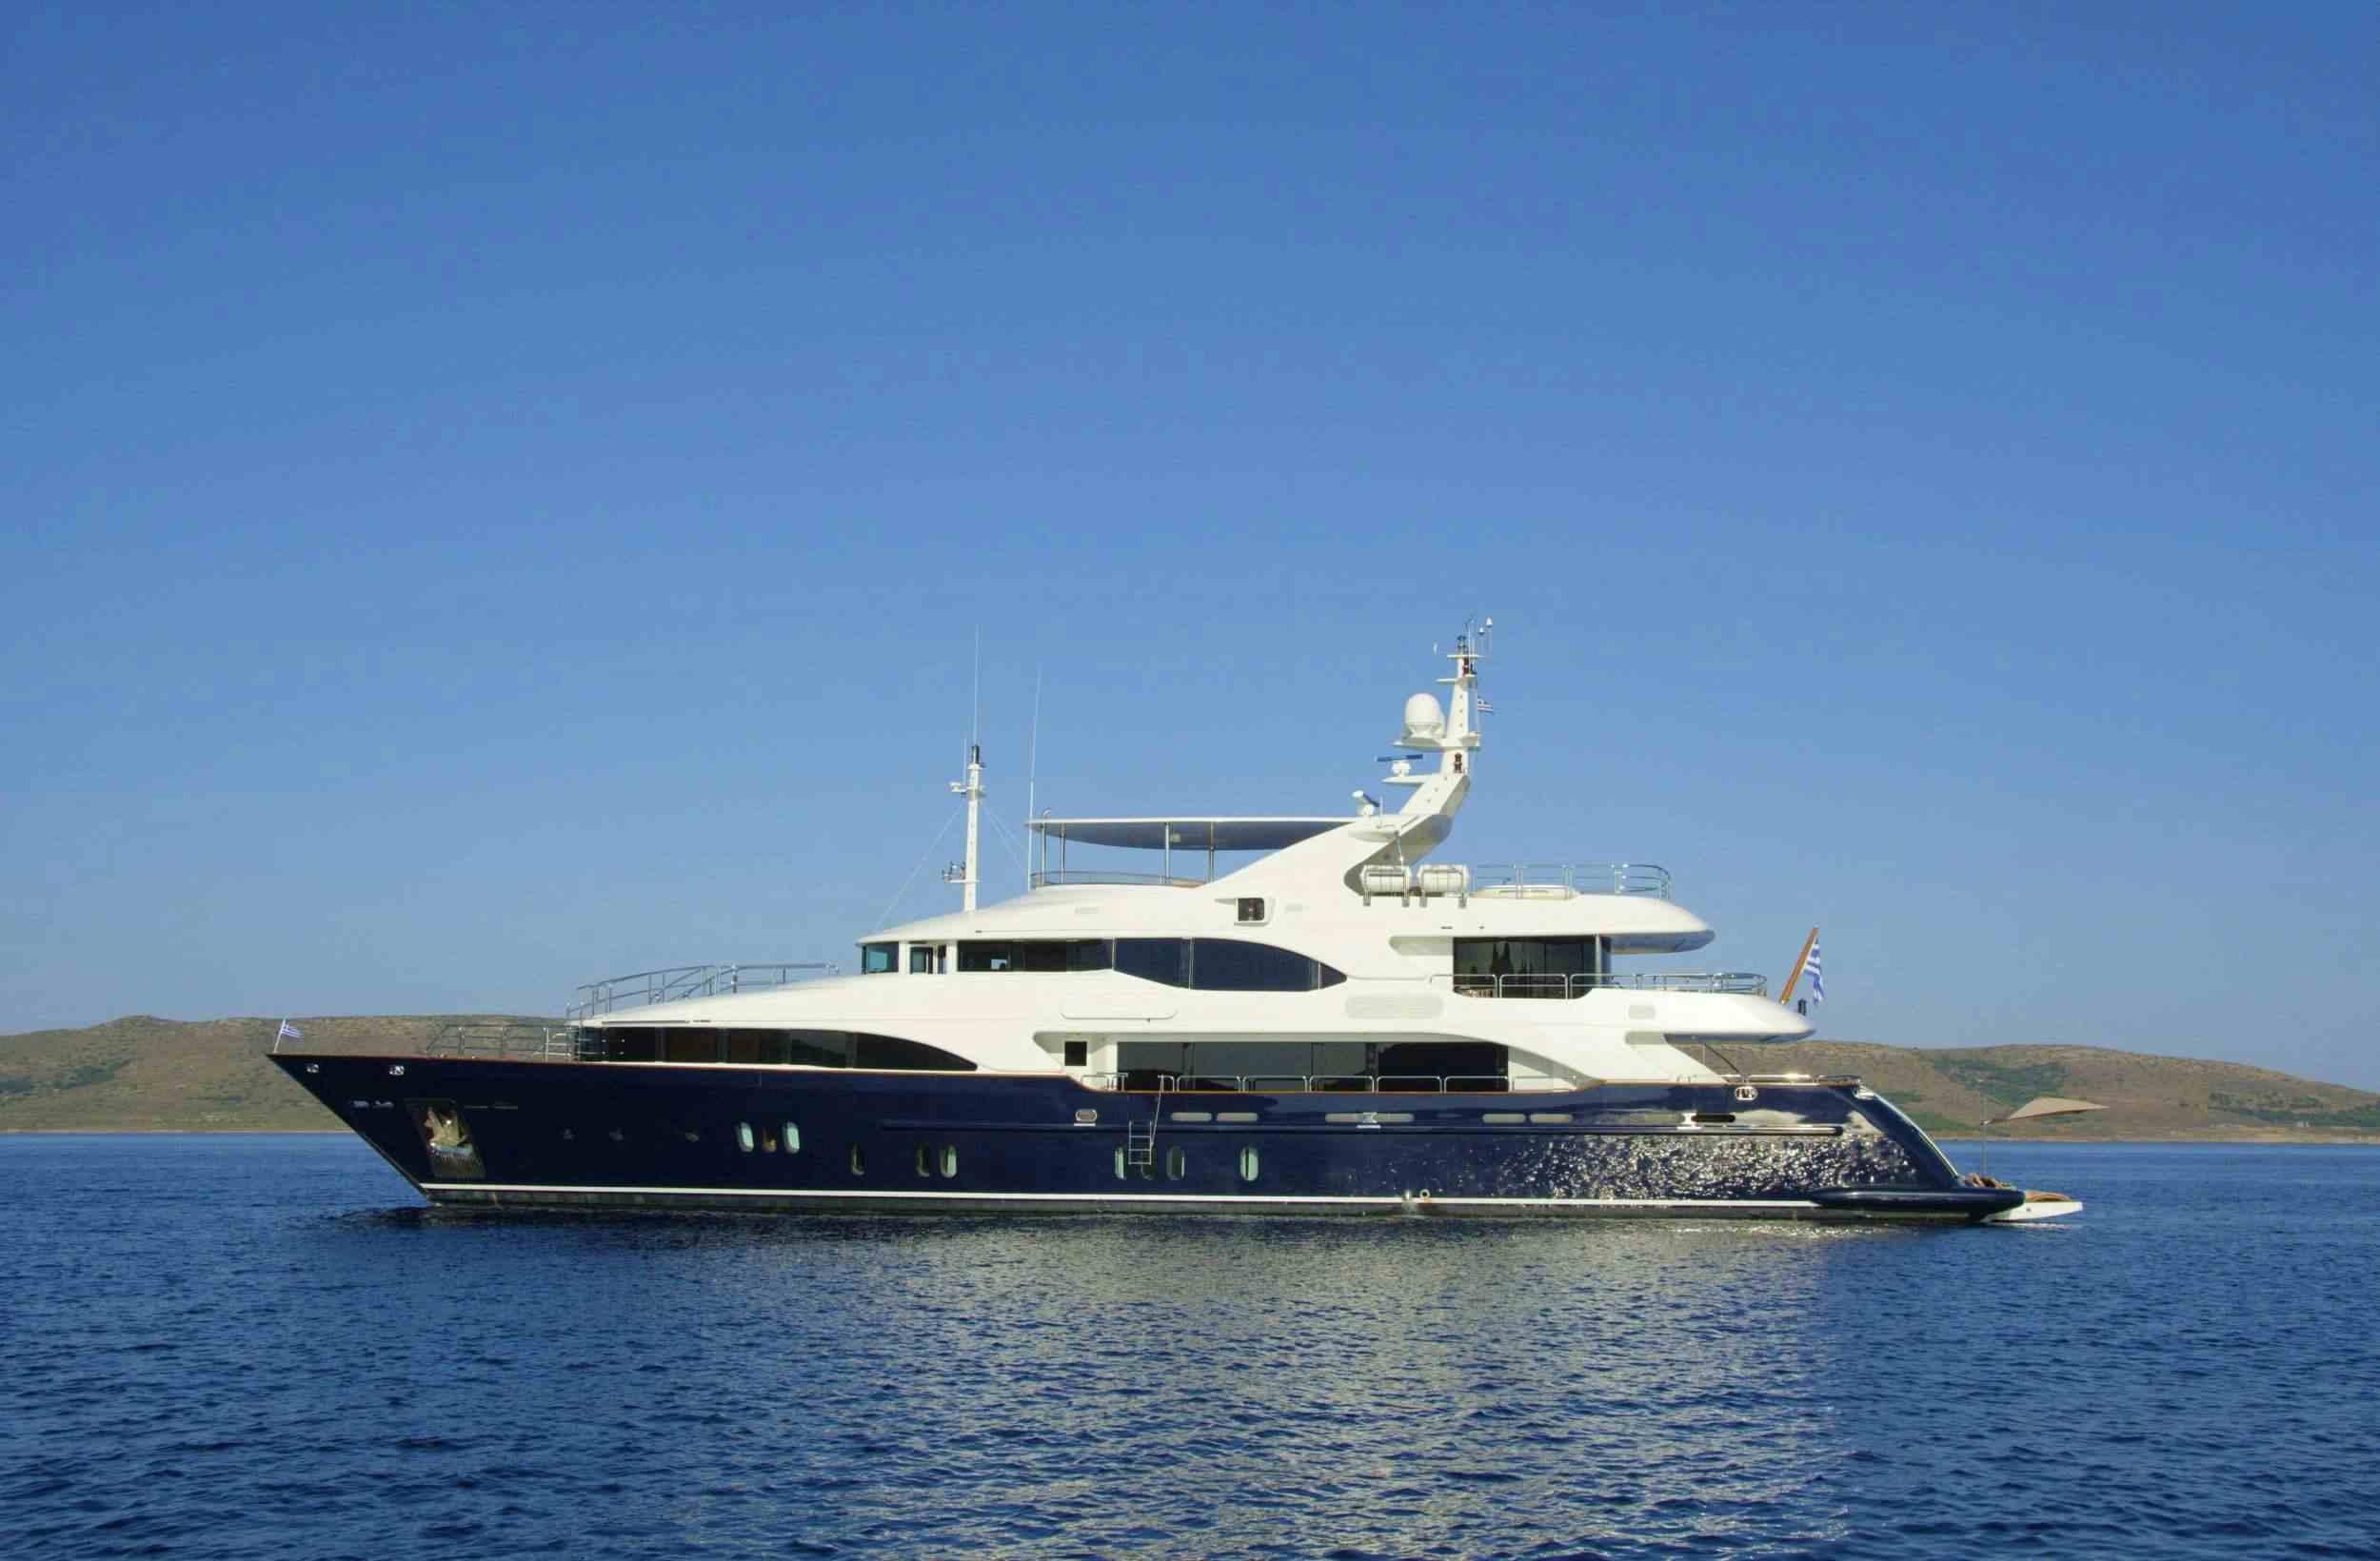 GRANDE AMORE - Yacht Charter Eden Island & Boat hire in Summer: W. Med -Naples/Sicily, Greece, W. Med -Riviera/Cors/Sard., Turkey, W. Med - Spain/Balearics, Croatia | Winter: Indian Ocean and SE Asia, Red Sea, United Arab Emirates 1